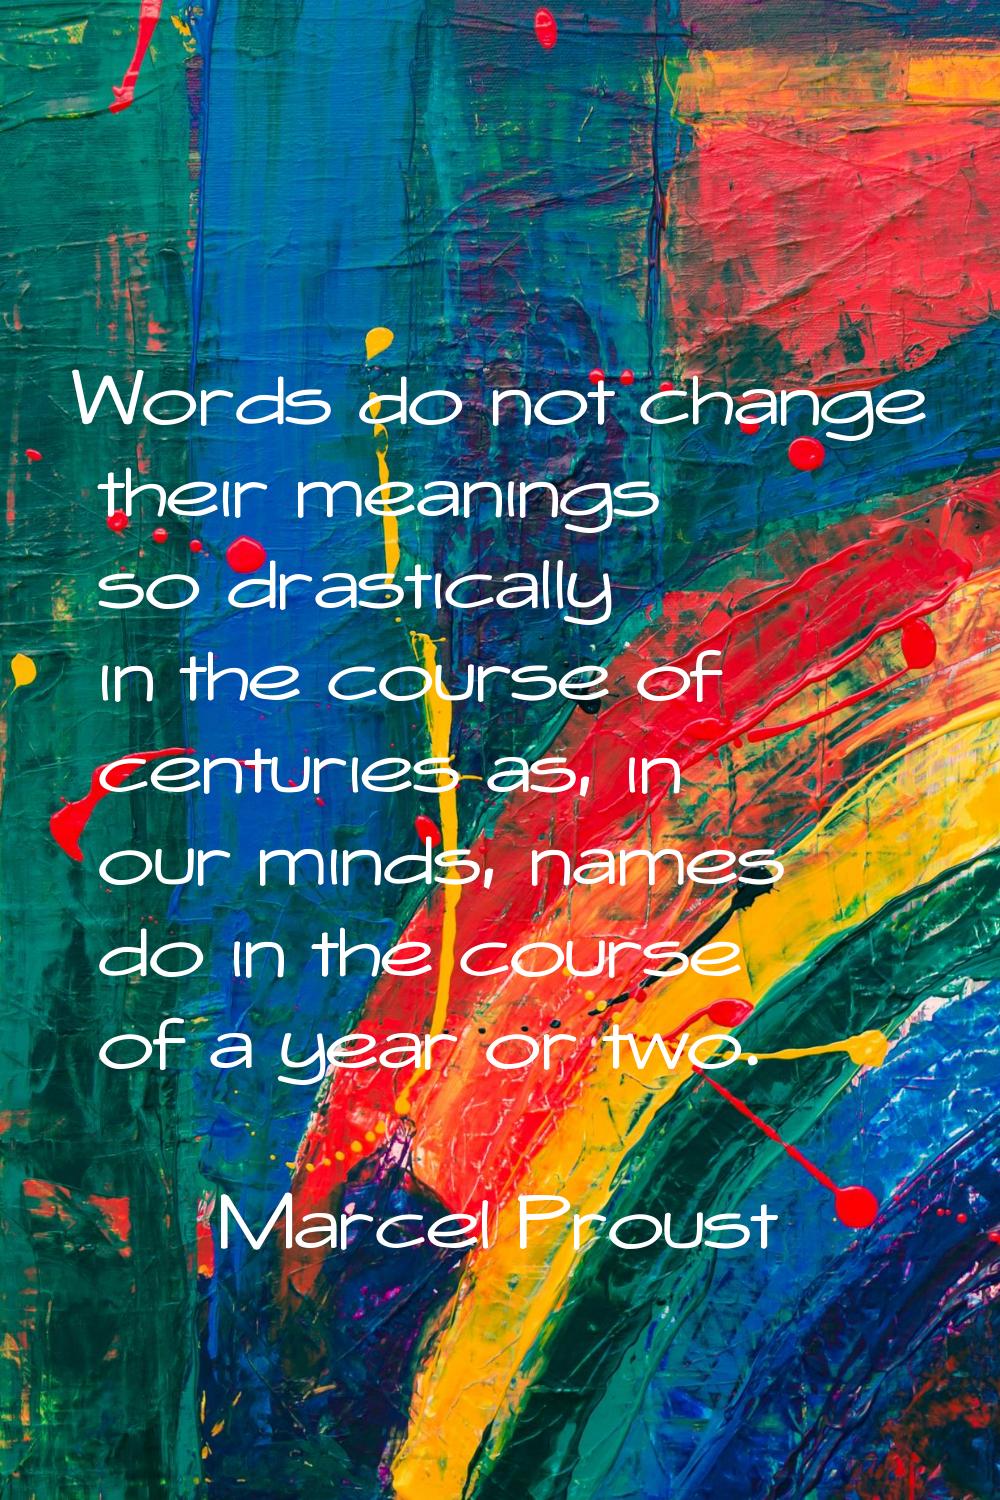 Words do not change their meanings so drastically in the course of centuries as, in our minds, name